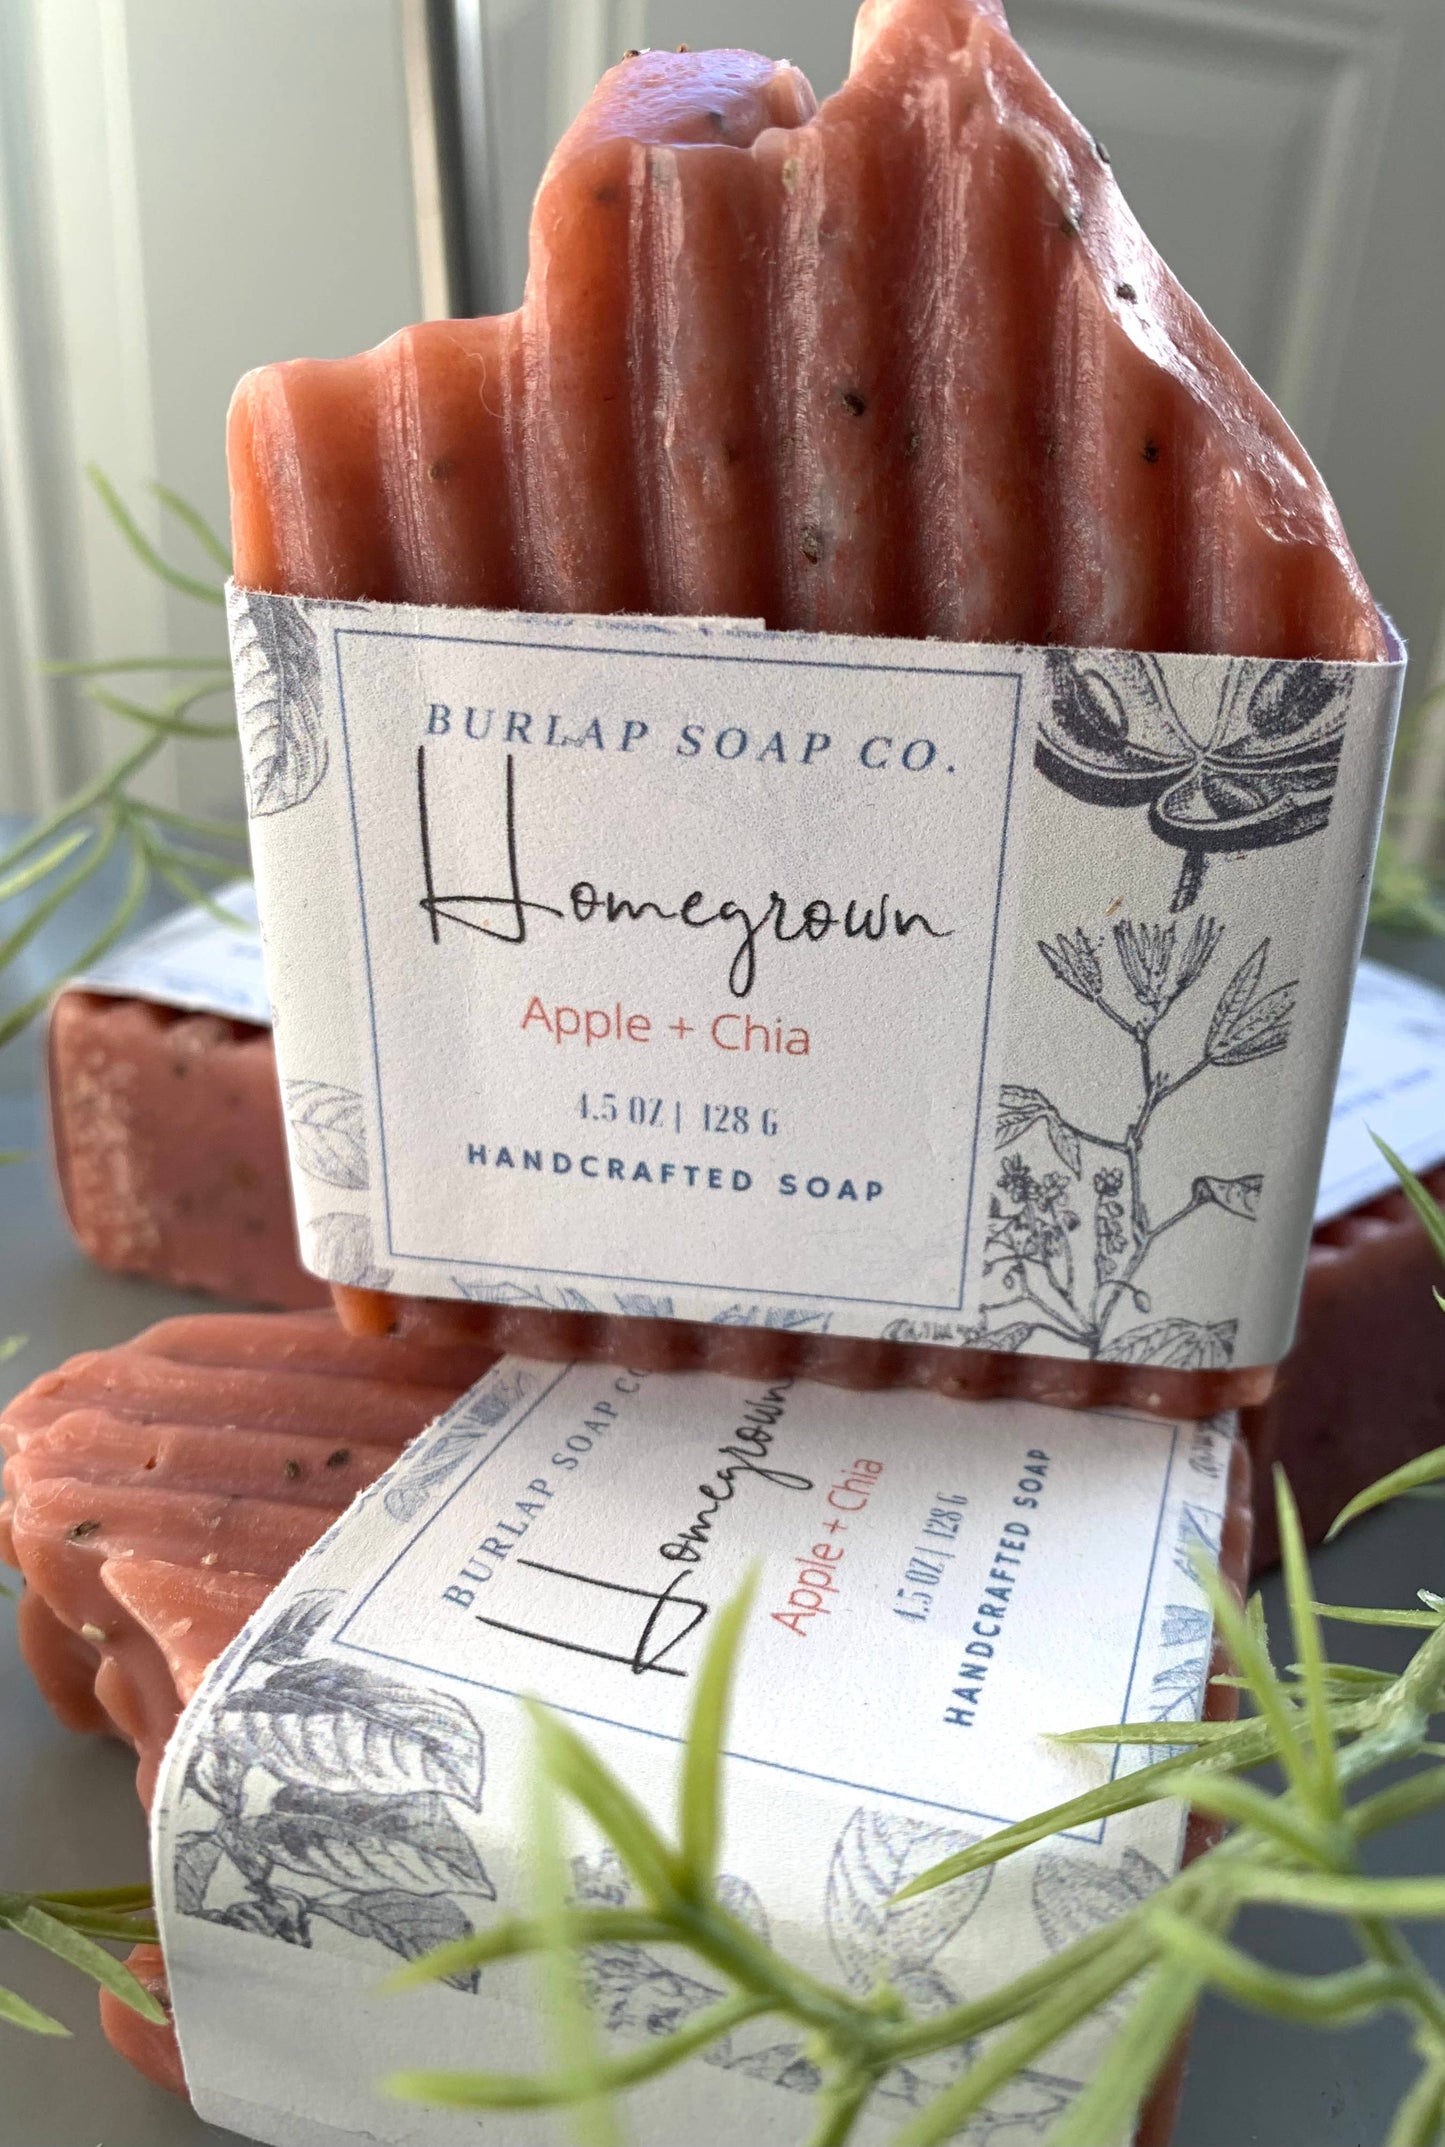 Homegrown Apple + Chia Handcrafted Artisan Soap